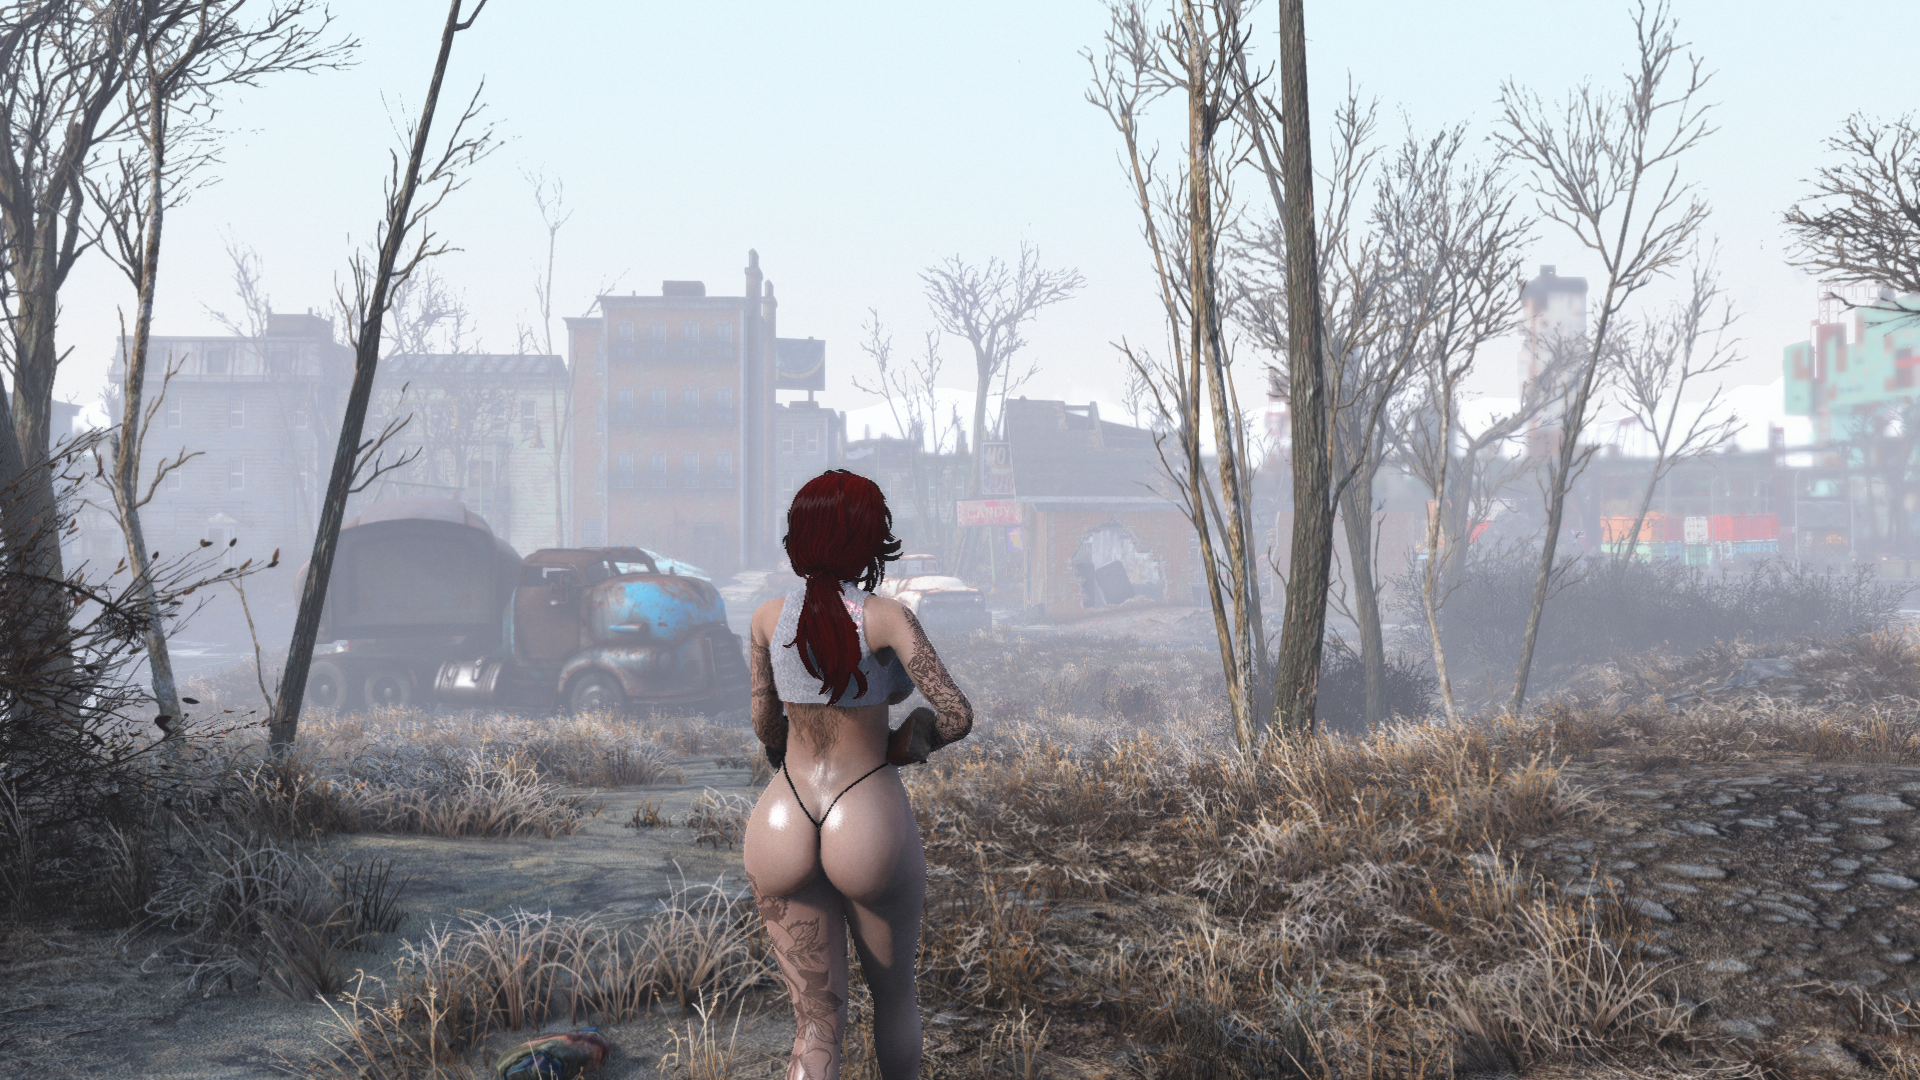 798396578_Fallout42020-04-0106-41-51.png.b0aff6c9adee150d7898599624fac31b.png